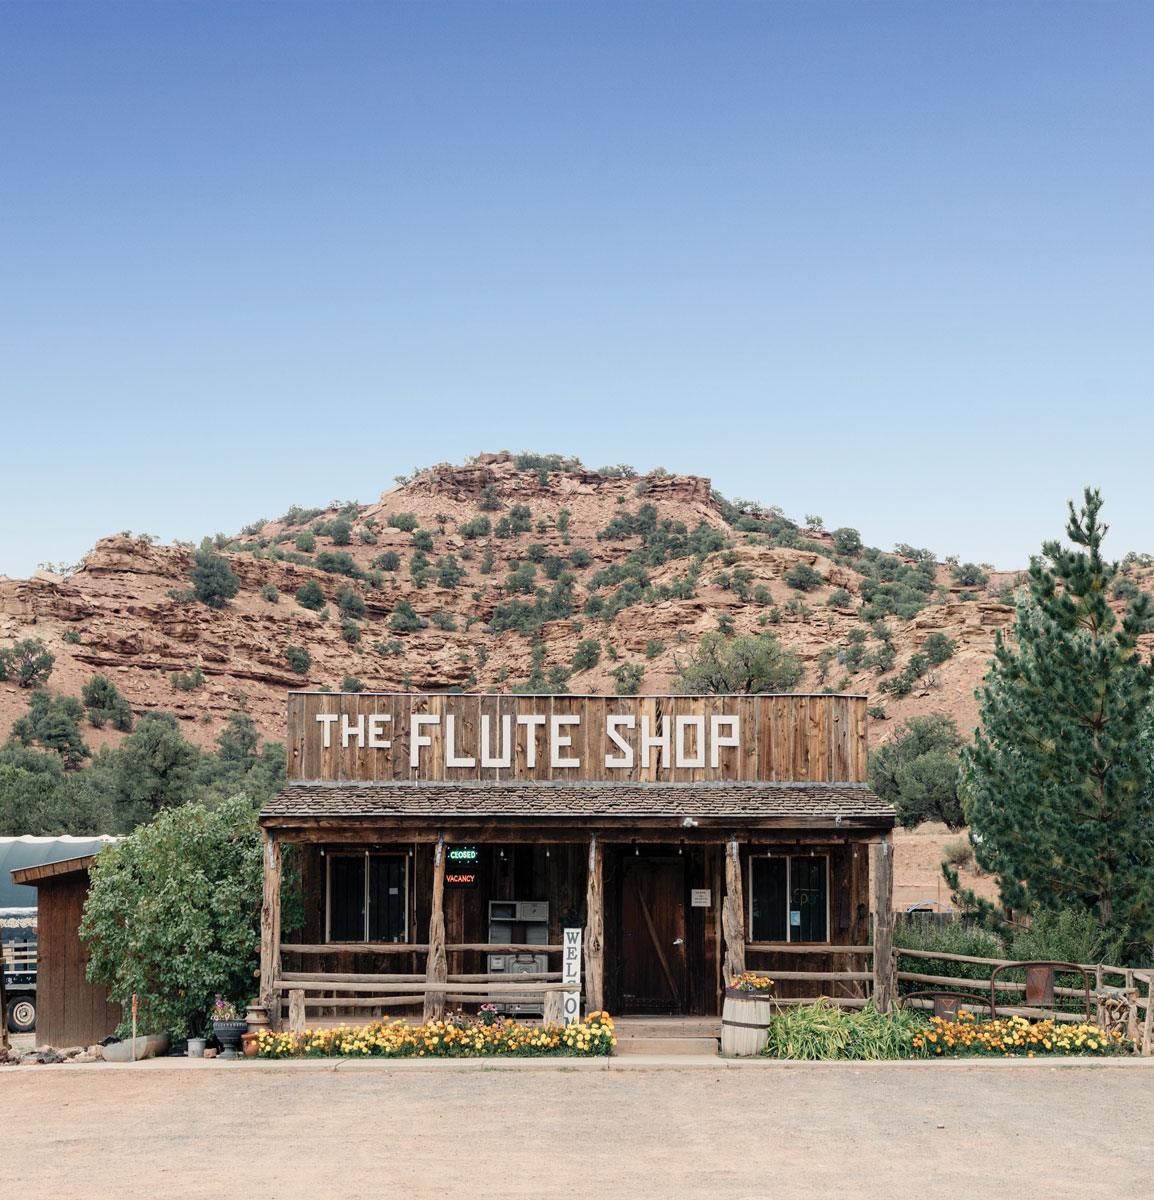 Front of the wooden storefront with big letters that spell "The Flute Shop" in front of a desert mountain landscape.